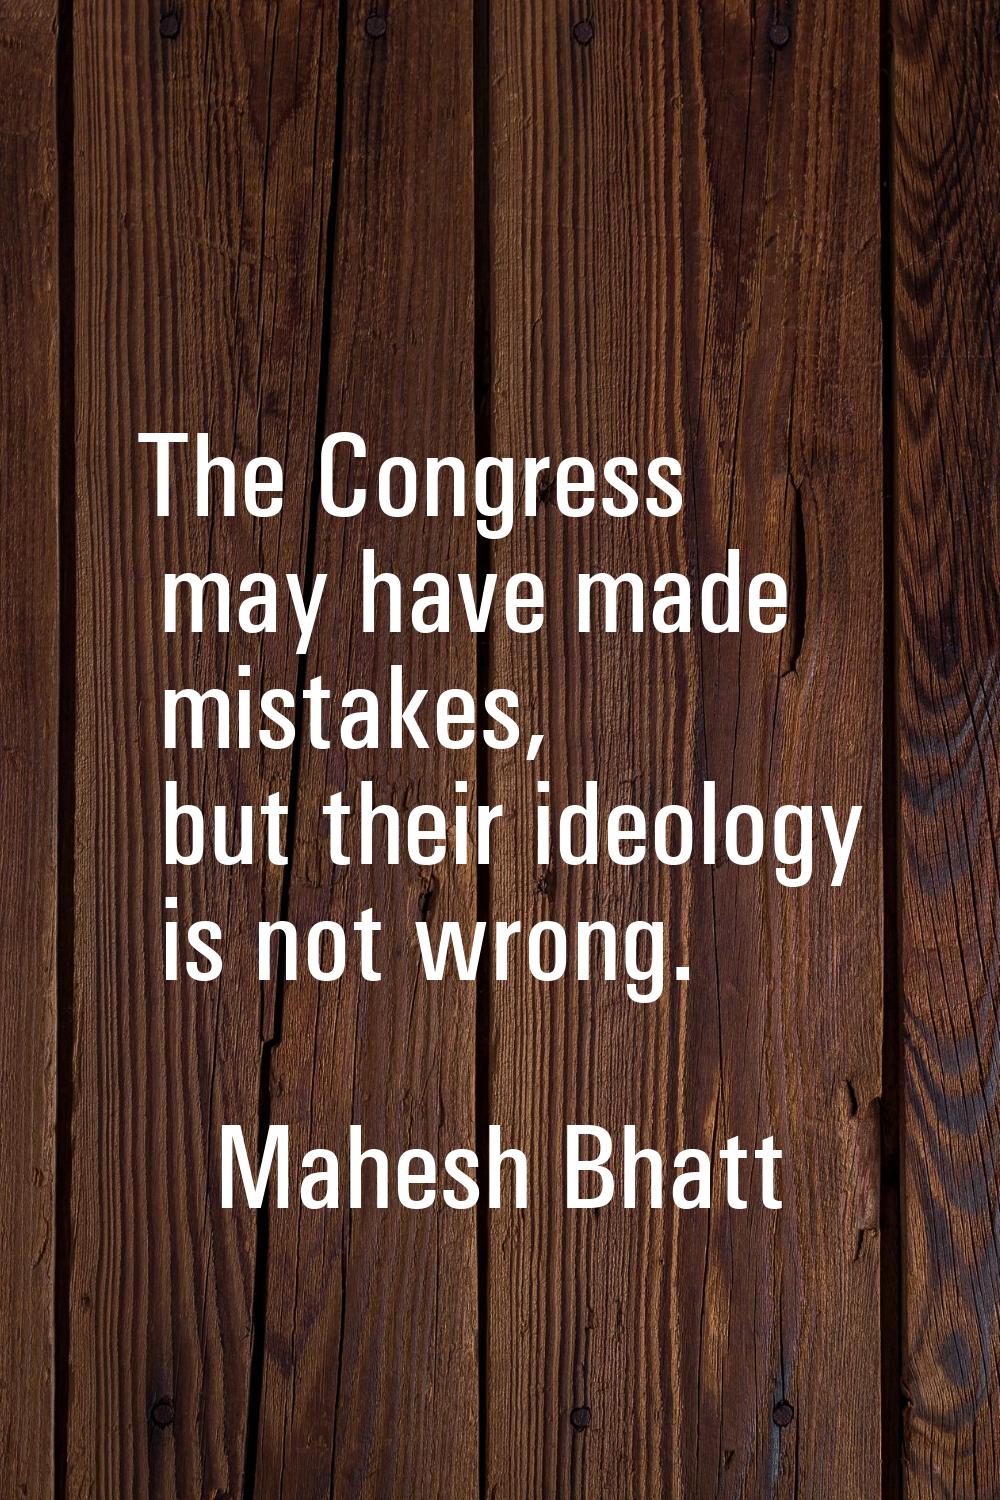 The Congress may have made mistakes, but their ideology is not wrong.